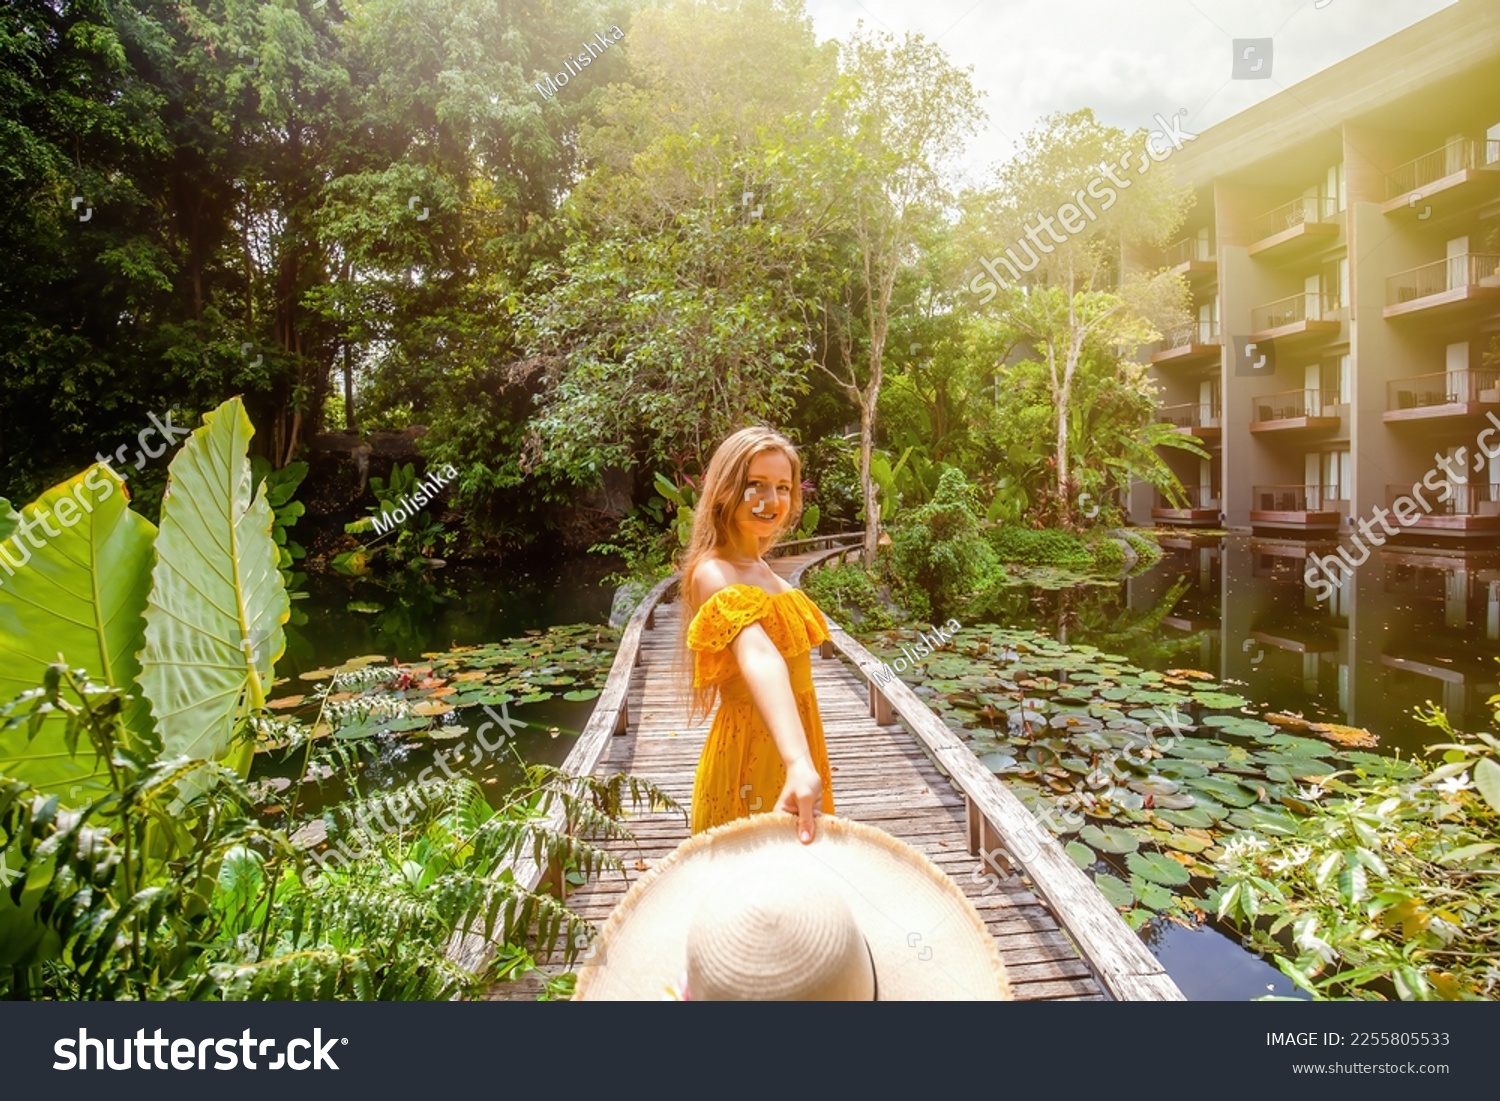 Happy woman in yellow dress dancing with straw hat in her hand, looking at camera. Summer vacation in resort. Female traveler on wooden bridge among tropical greenery and green pond with water lilies #2255805533